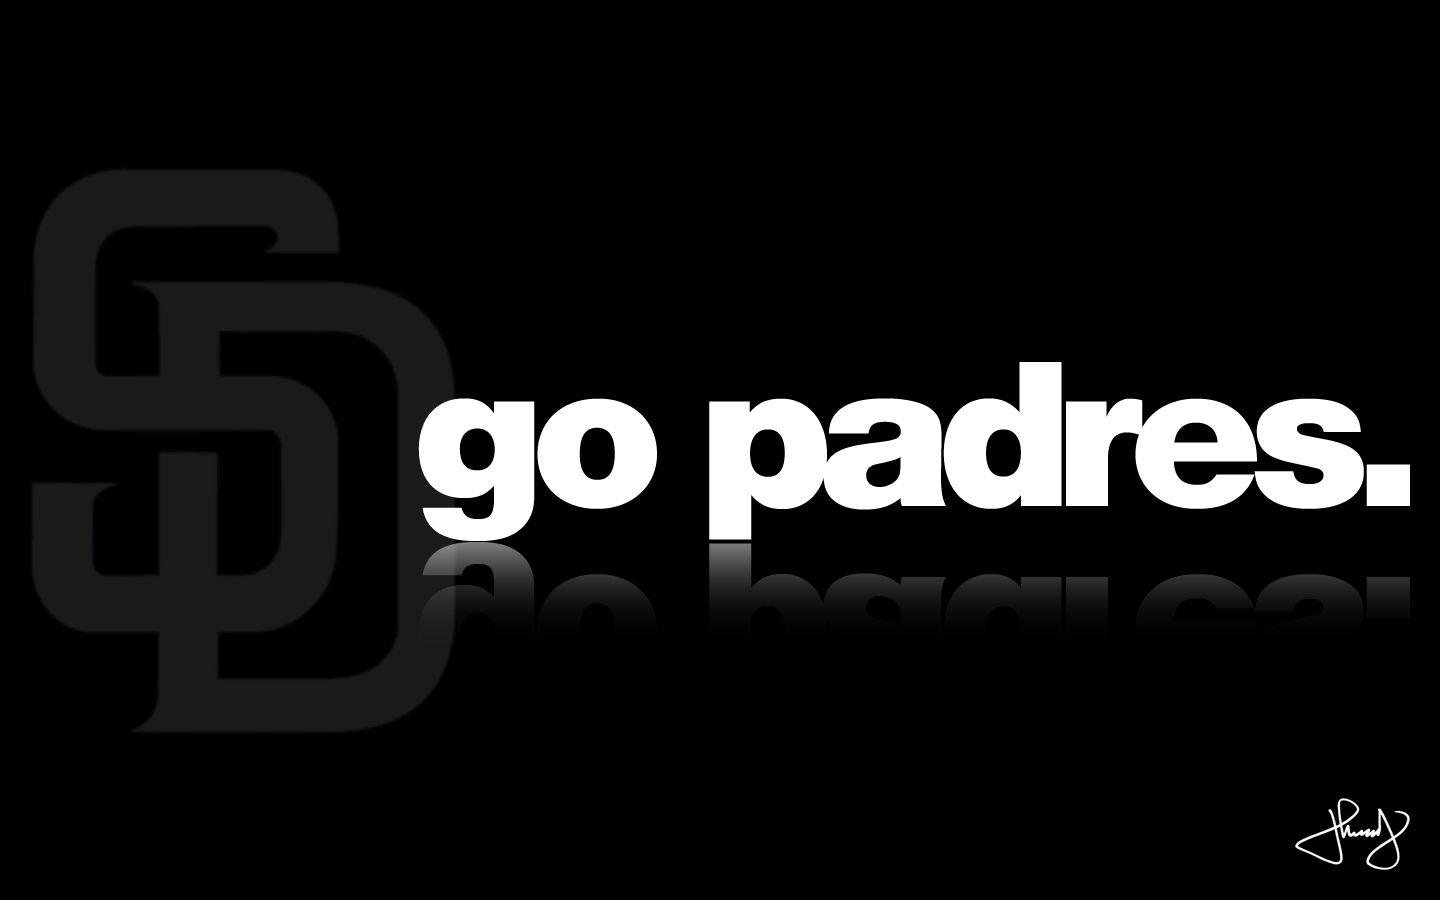 2023 San Diego Padres wallpaper  Pro Sports Backgrounds